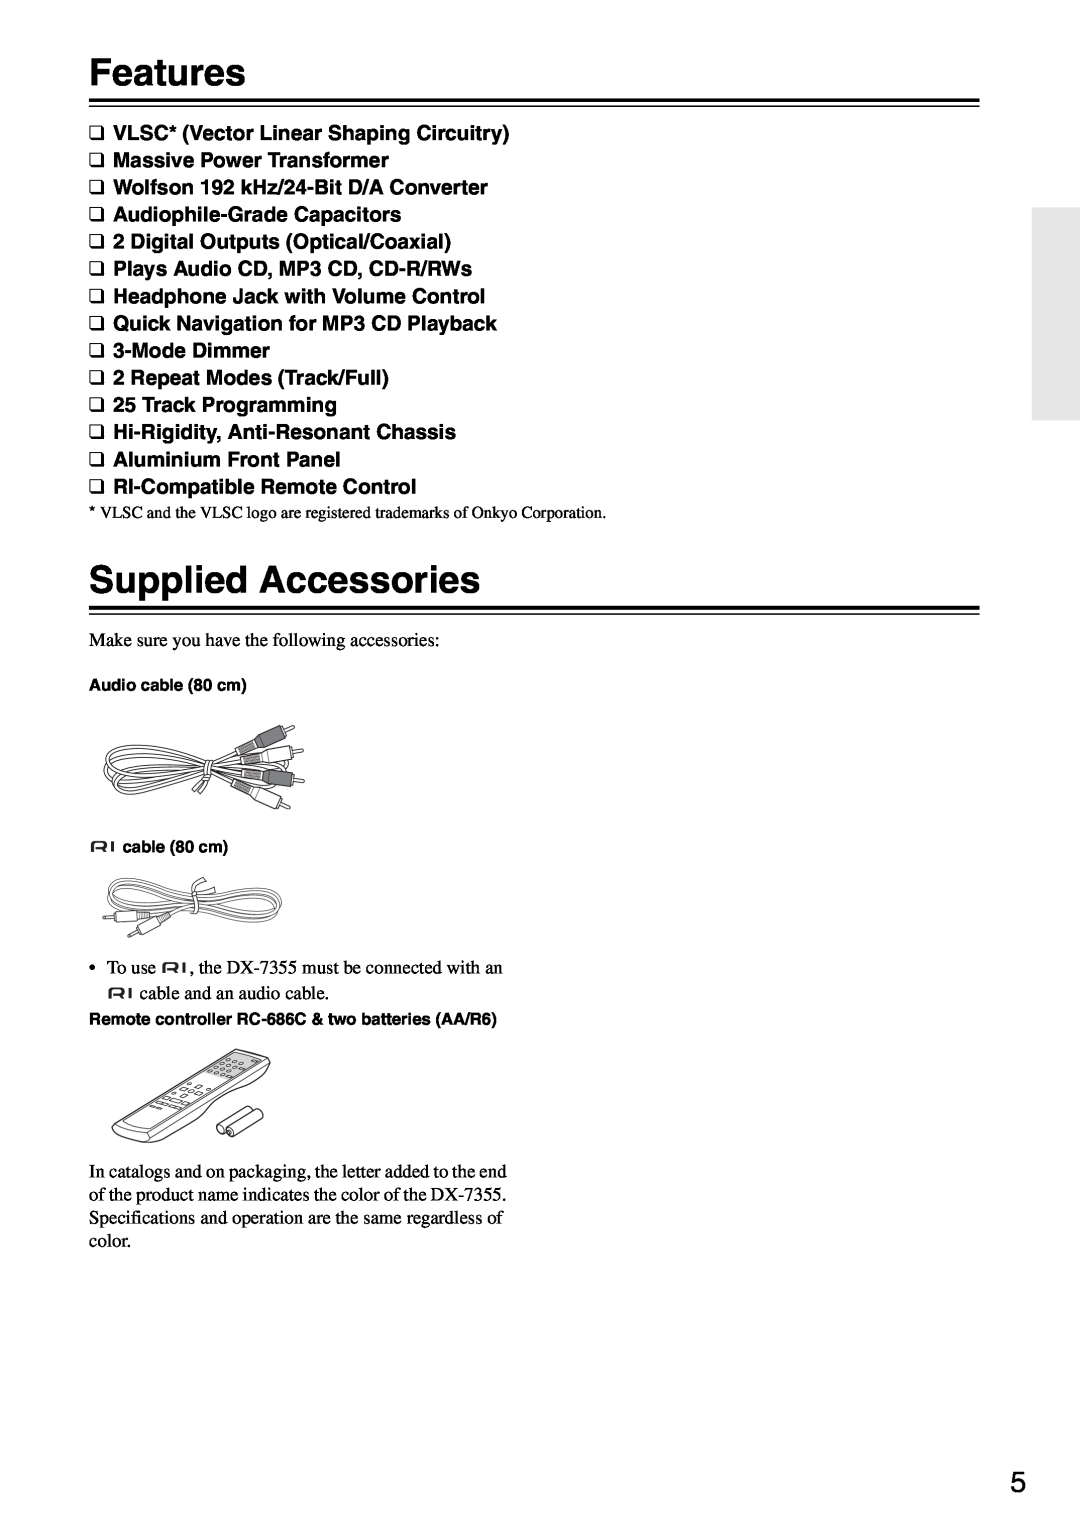 Onkyo DX-7355 instruction manual Features, Supplied Accessories 